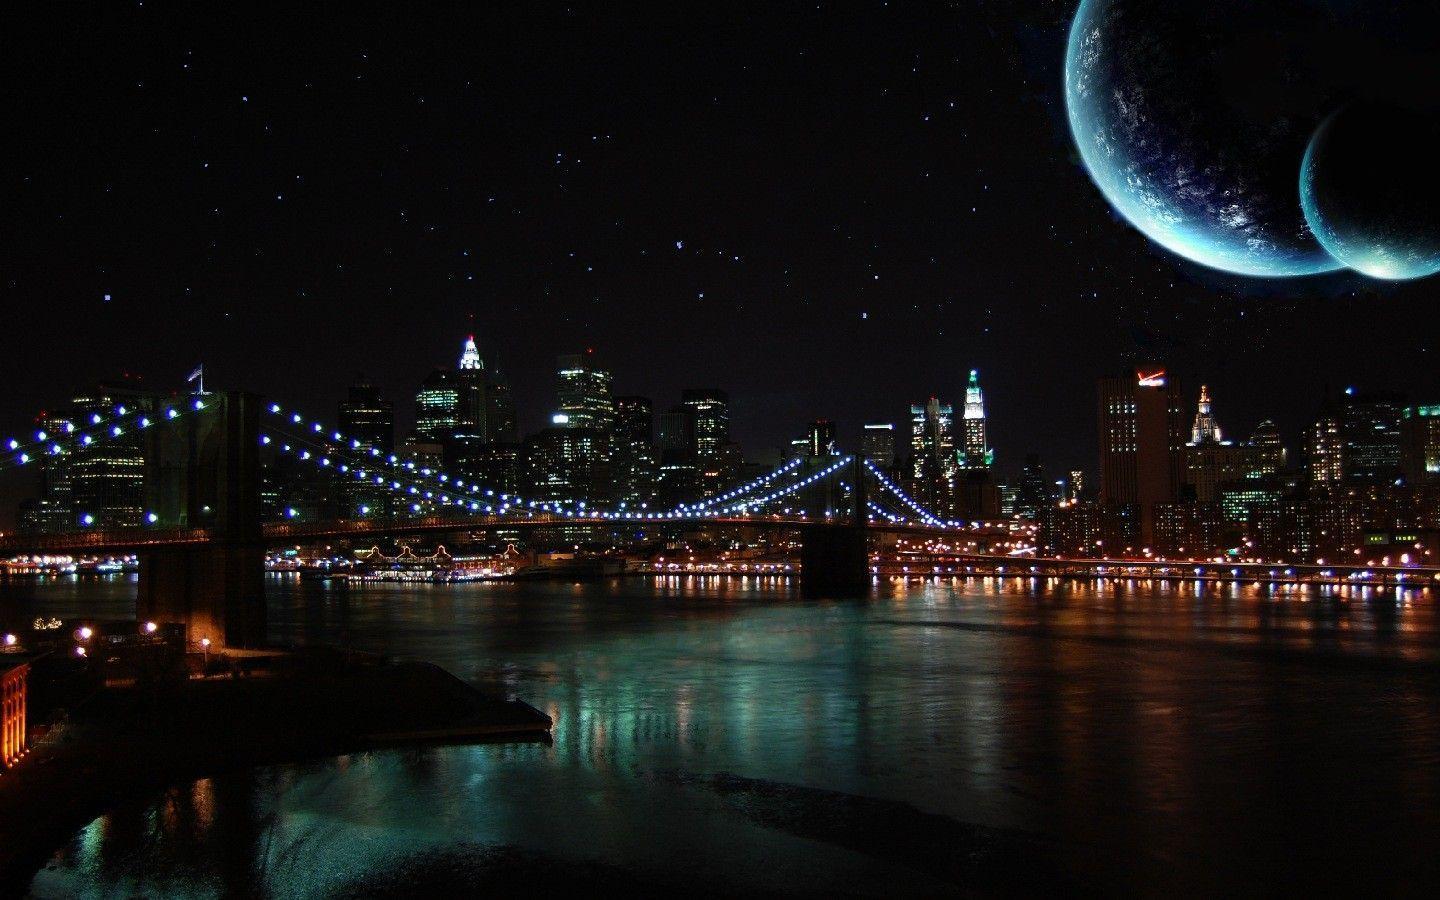 City Night Sky Wallpapers - Top Free City Night Sky Backgrounds